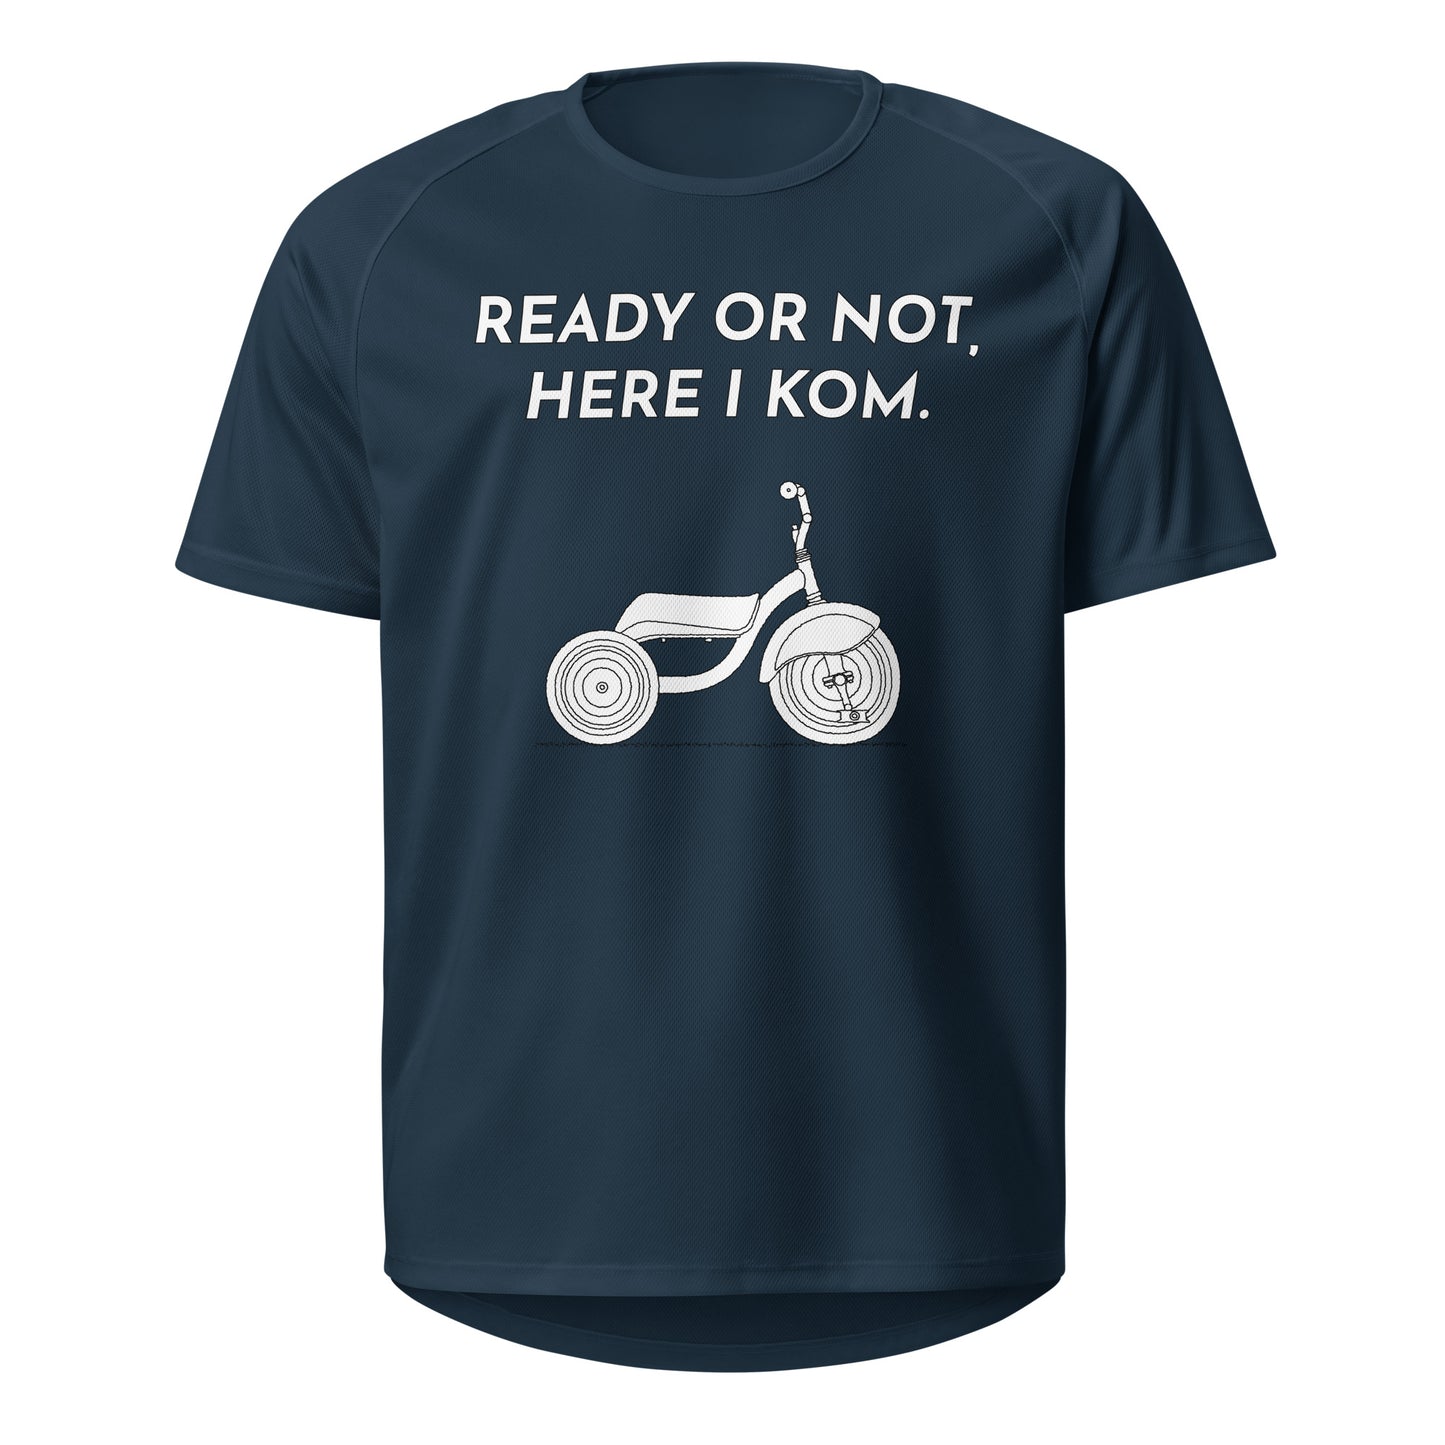 Ready Or Not, Here I KOM, Tricycle Sports Jersey Shirt for Cyclists